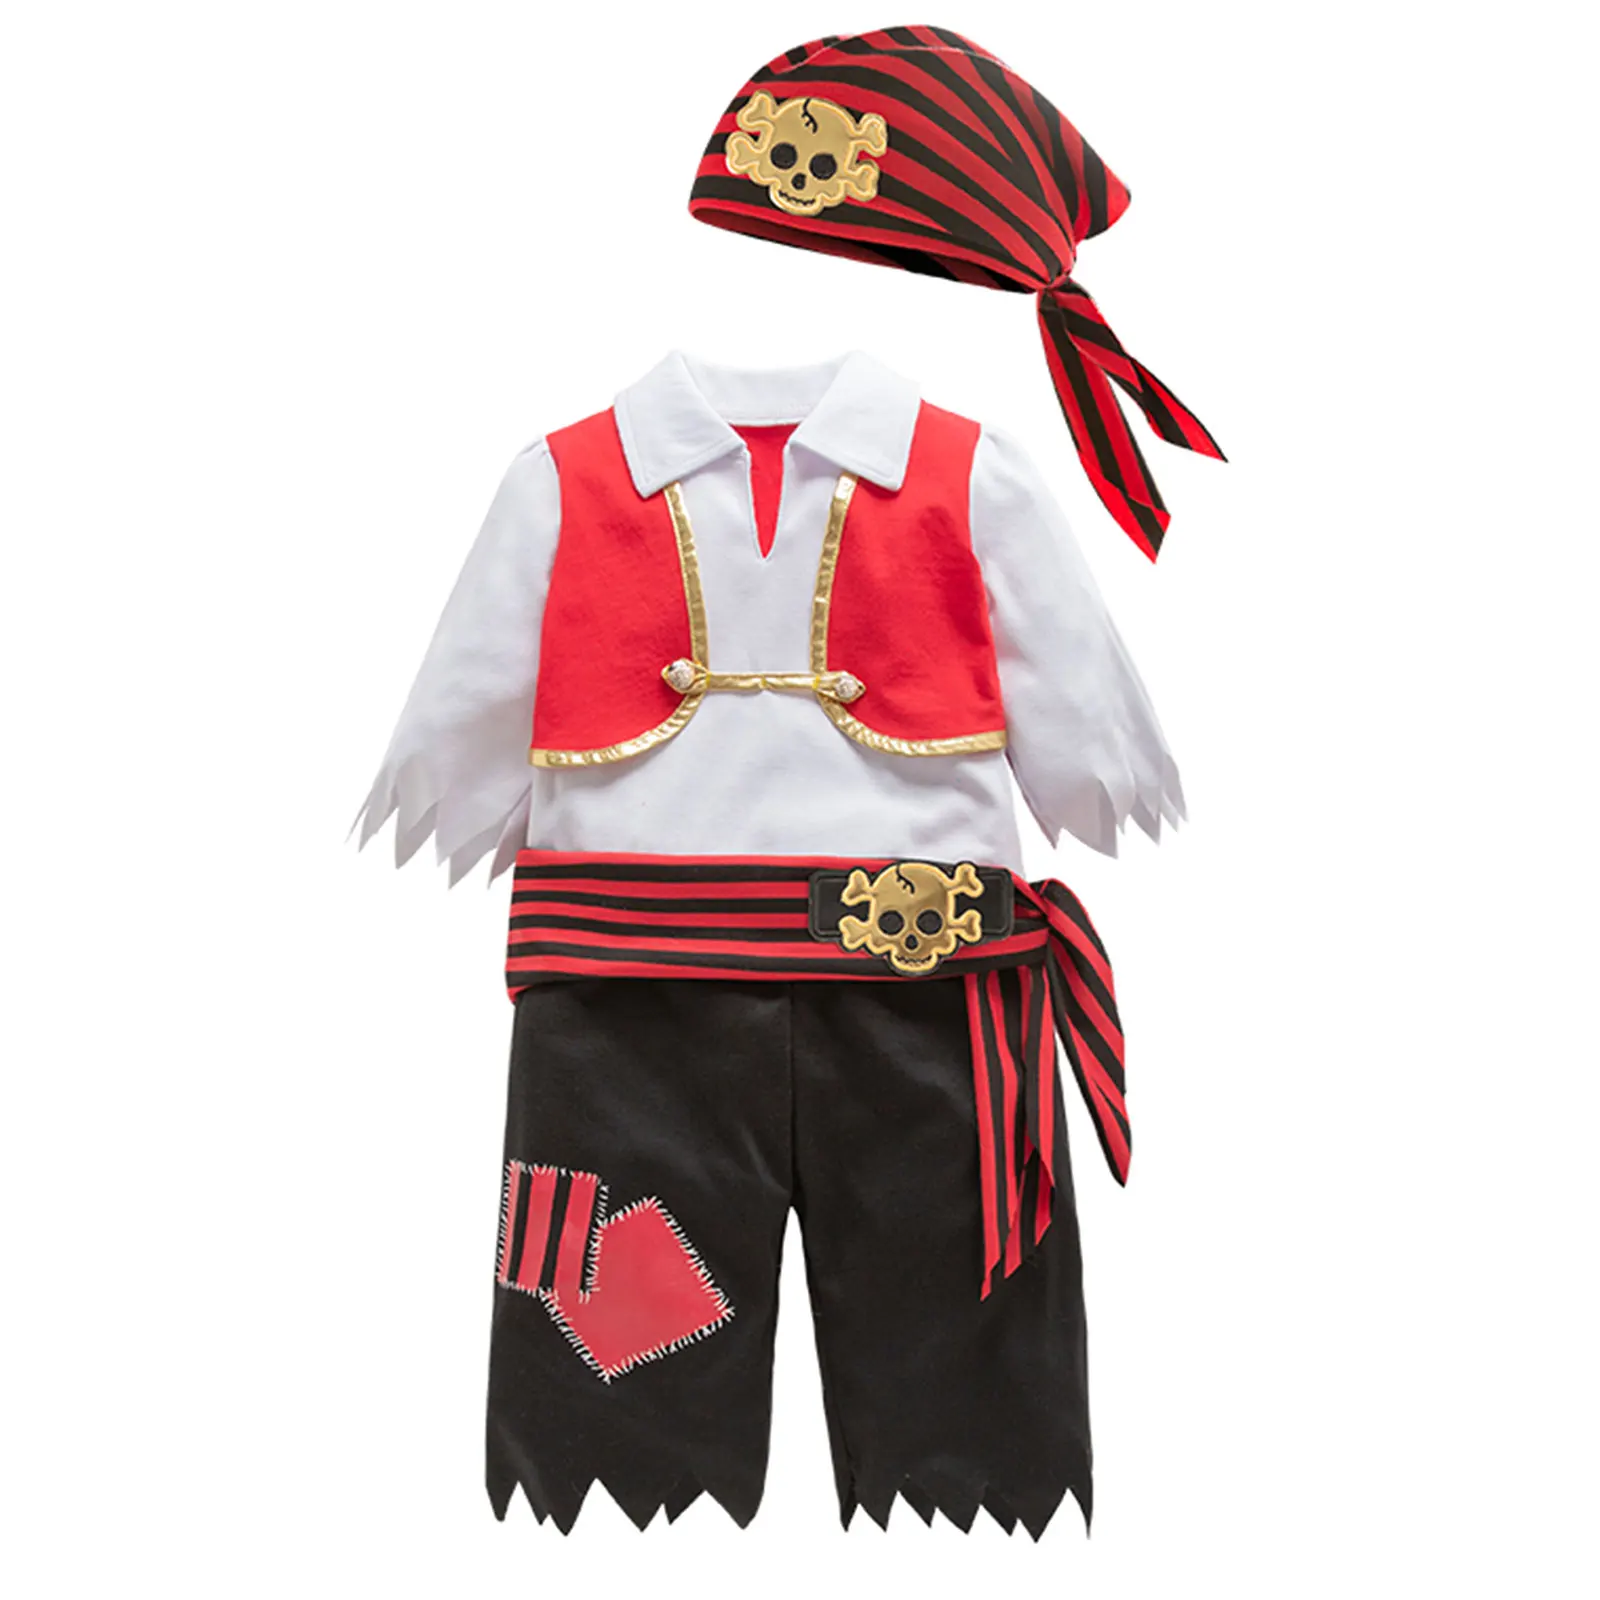 

Kids Boys Pirate Costume for Halloween Carnival Party Cosplay Waistband+Head Scarf+Vest Tops+Trousers Pants Set Fancy Dress Up